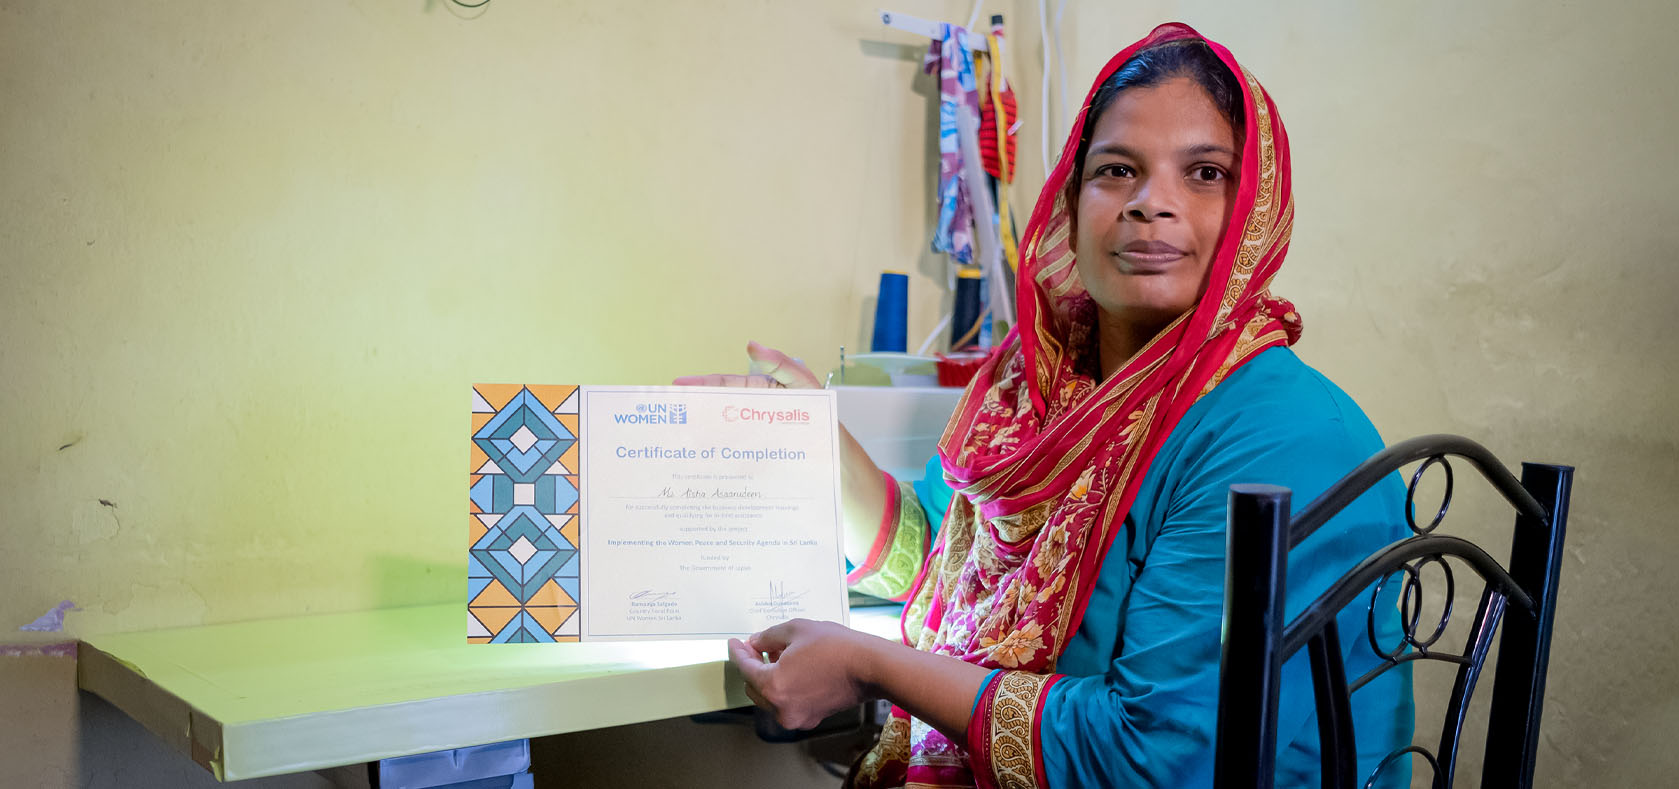 Aysha shows the certificate she received at the end of the training at her home in Colombo-2, Sri Lanka on 9 December 2022. Photo: UN Women Sri Lanka/Ruvin De Silva